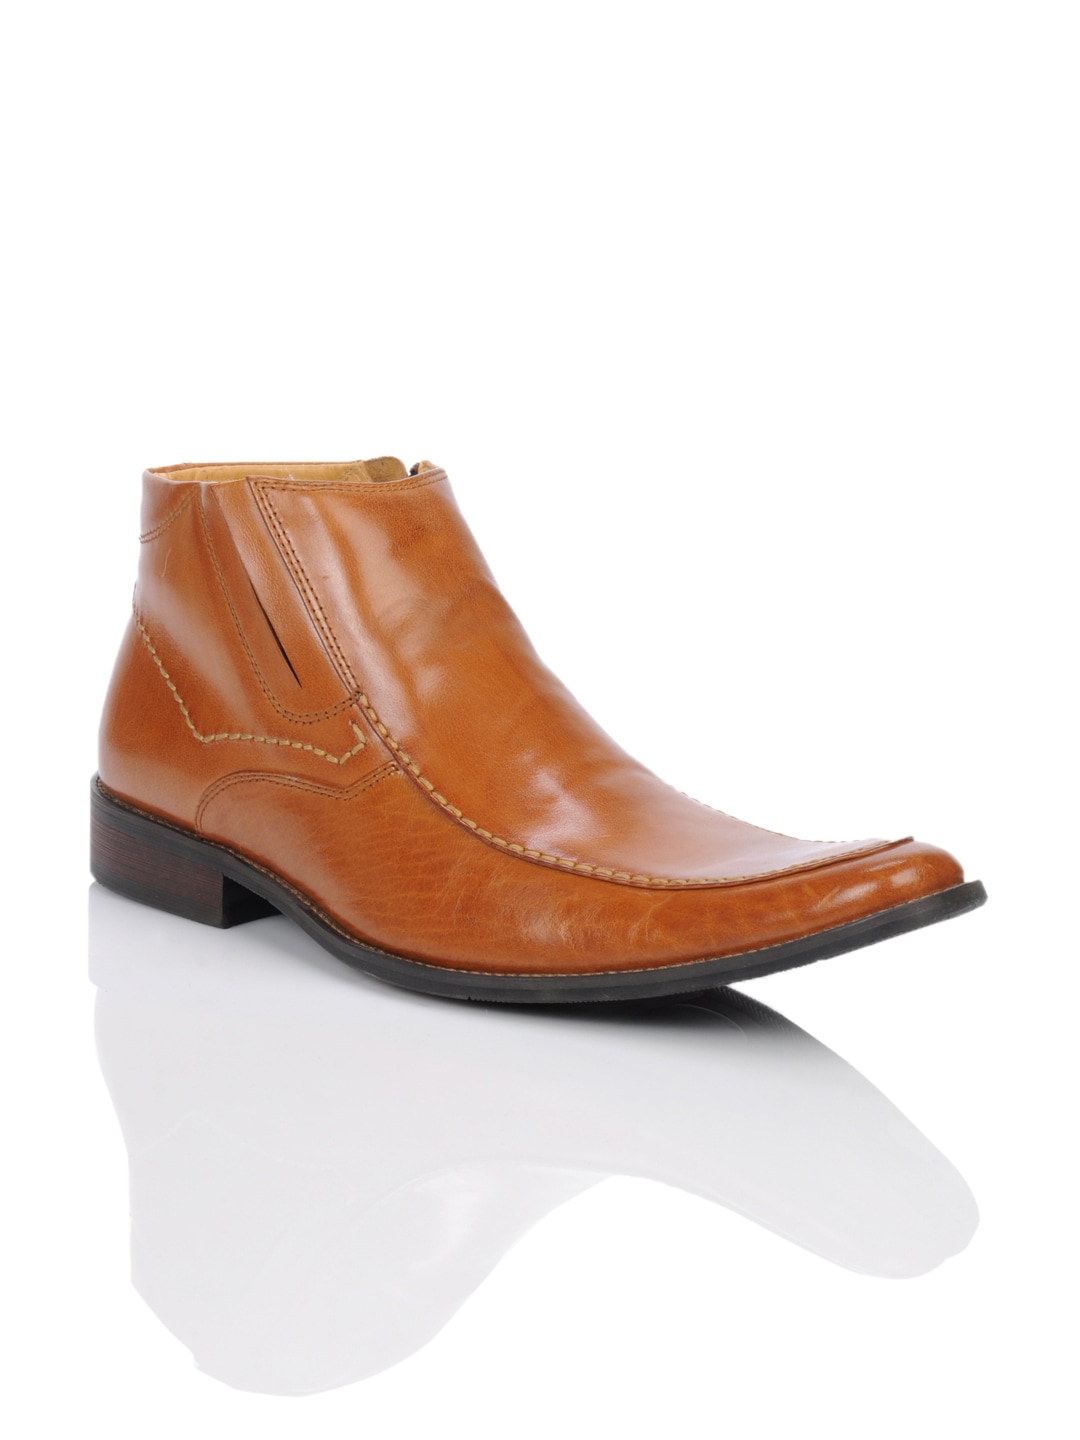 Homme Men Tan Semi Formal Ankle Boots